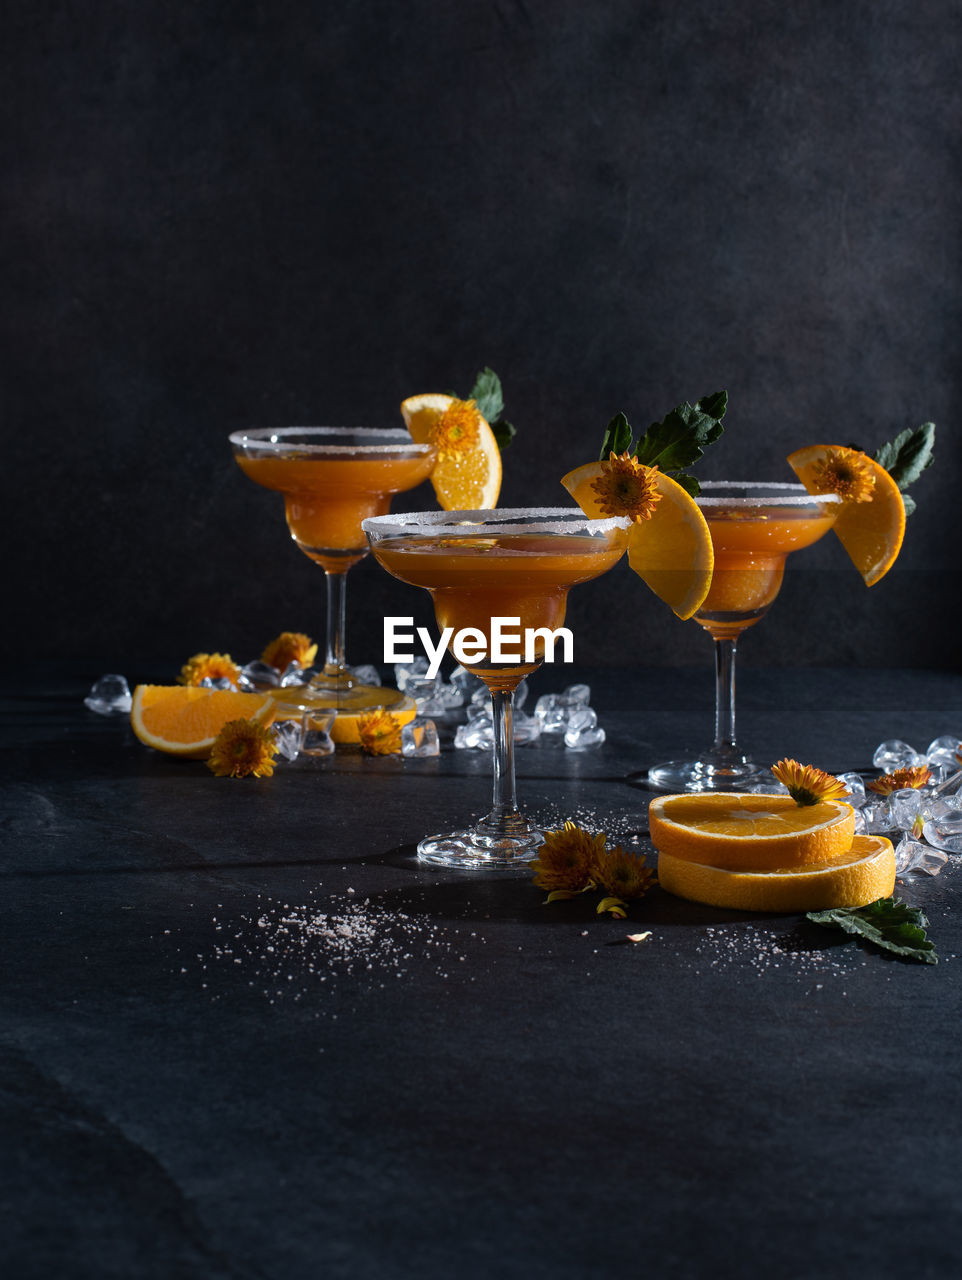 food and drink, food, fruit, alcohol, yellow, drink, cocktail, still life photography, refreshment, studio shot, healthy eating, citrus fruit, glass, no people, alcoholic beverage, black background, martini glass, freshness, cocktail garnish, still life, dark, household equipment, orange color, indoors, drinking glass, martini